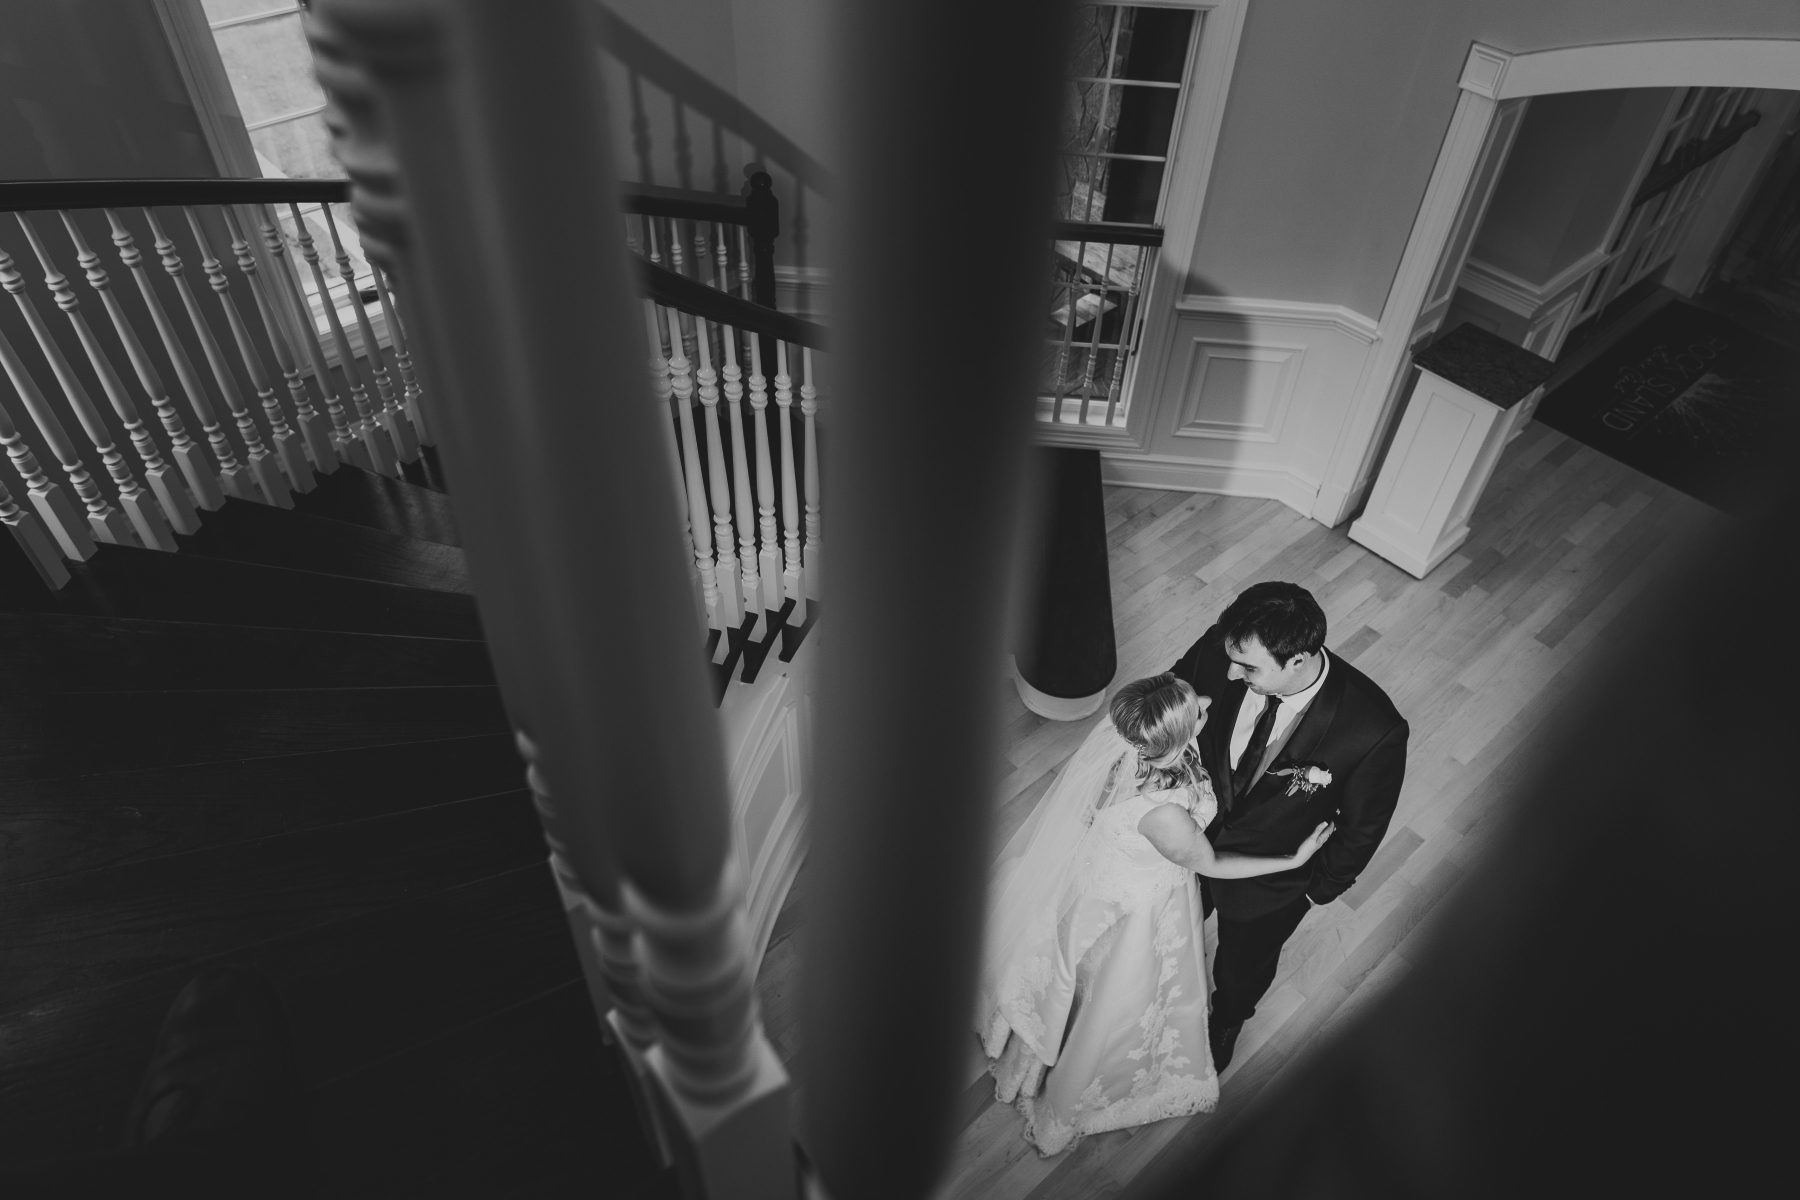  Incorporating compositional tools is another way I can help my images stand out from the crowd, rather than just a straight shot, I used the banister to help me frame Tara and Zach, to draw attention to them in the room. 